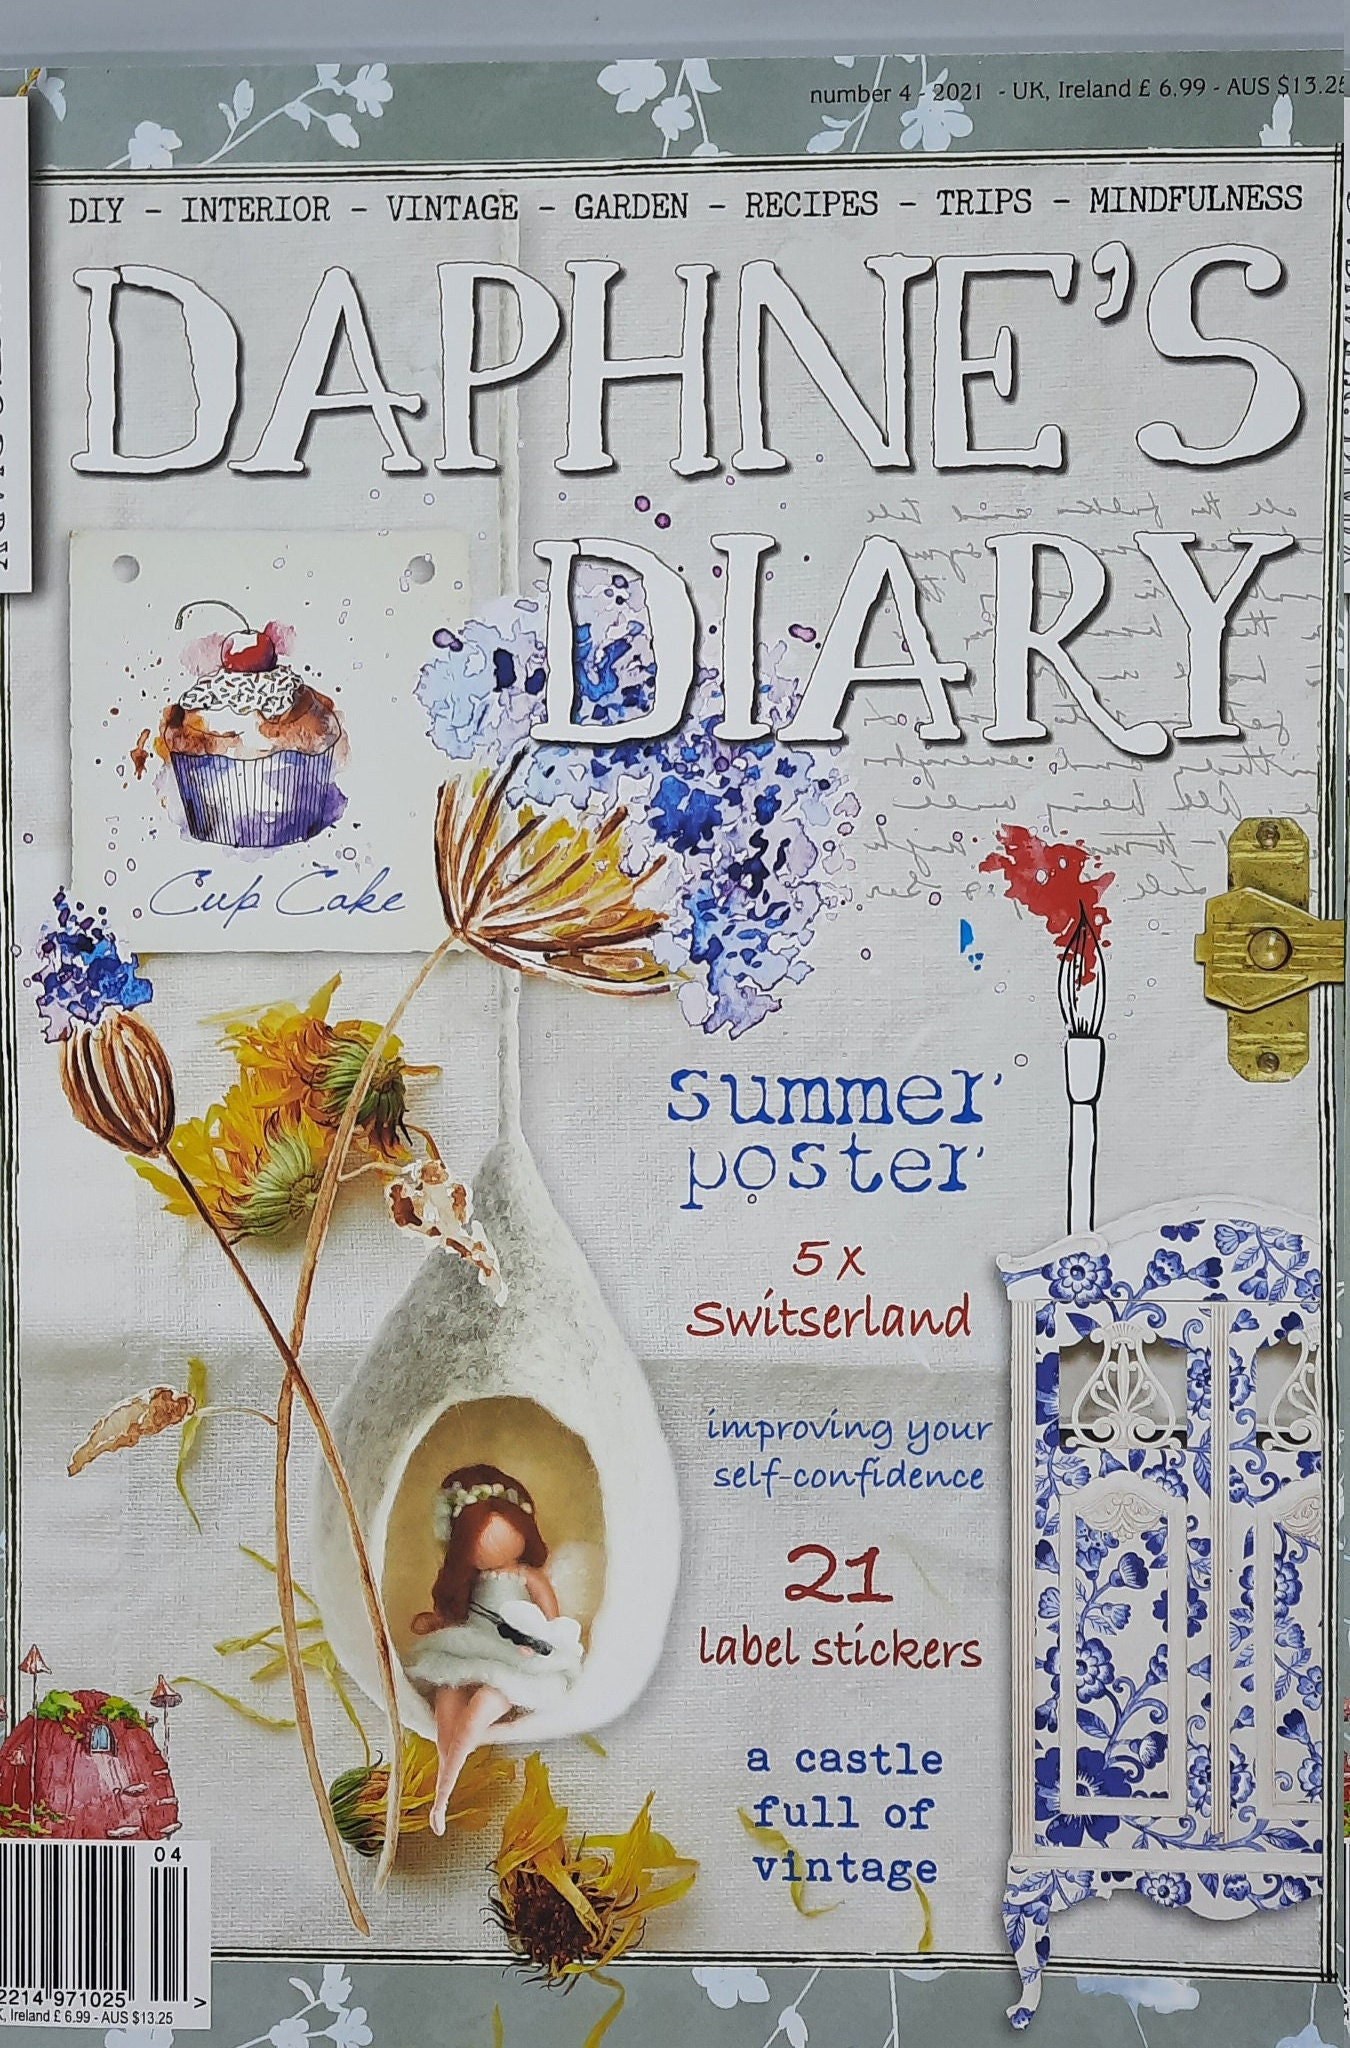 Magazines Archives - Daphne's Diary  Daphnes diary, Scrapbook printables  free, Diary